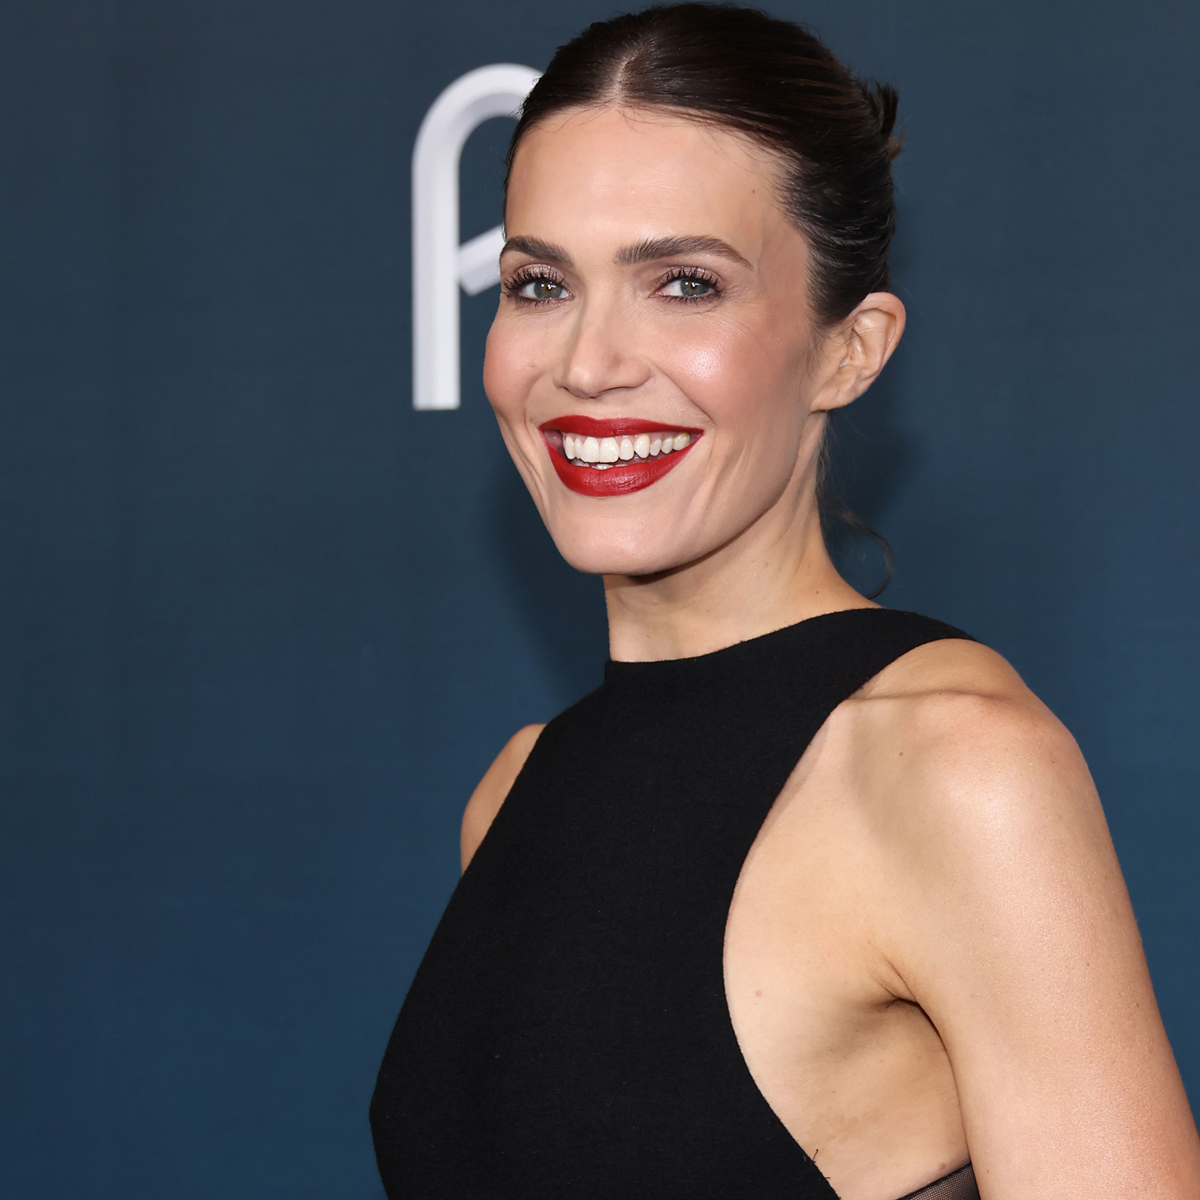 Mandy Moore Turns Heads With Daring Cutout Dress and Bold Red Lipstick